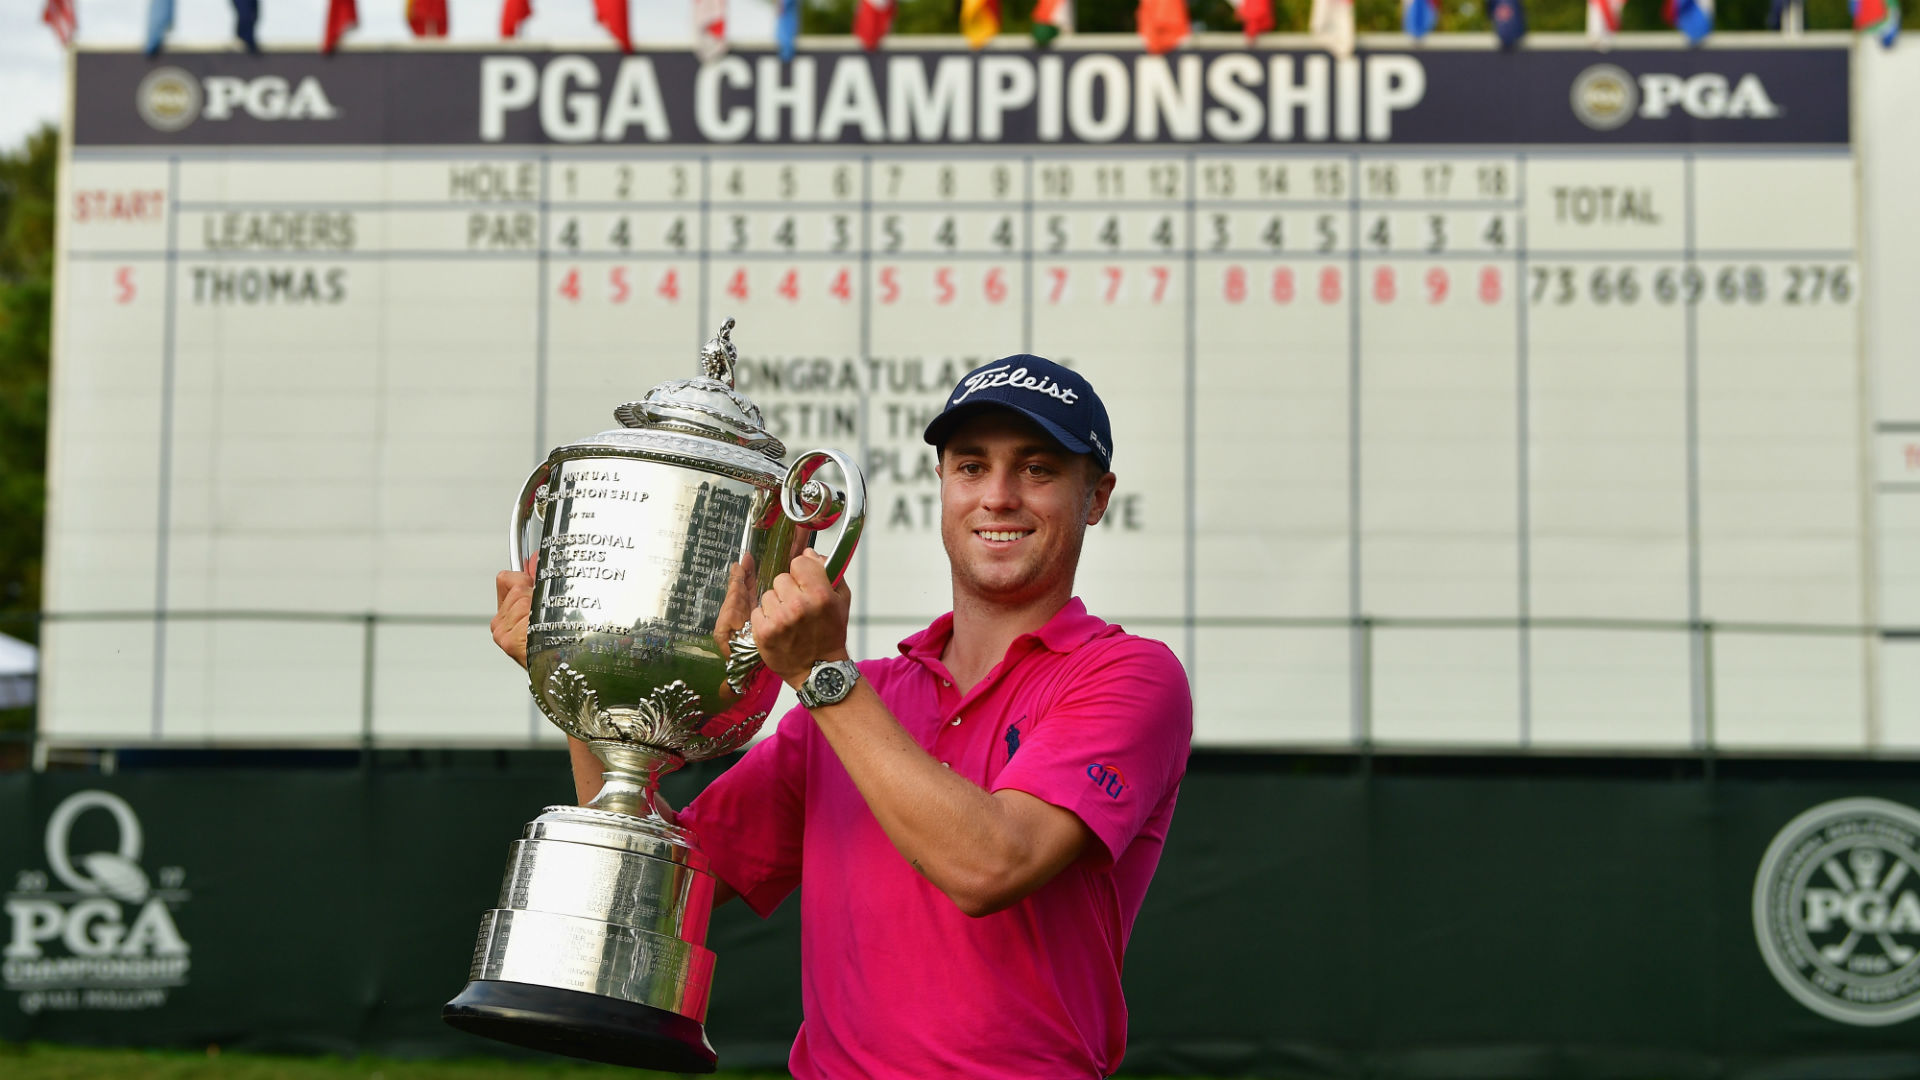 How To Watch Pga Championship 2018